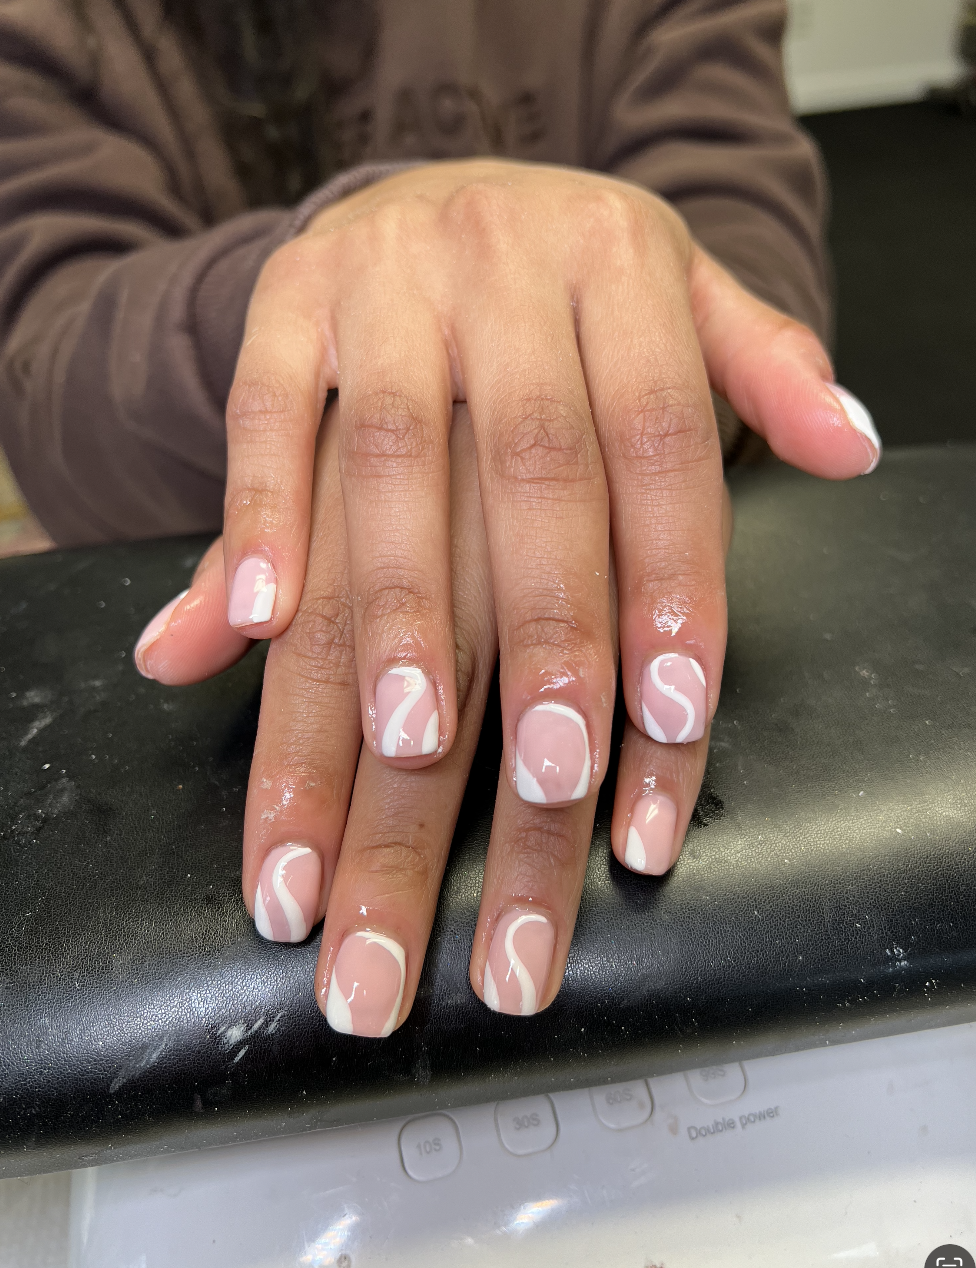 Hands with freshly done nails featuring a marble design